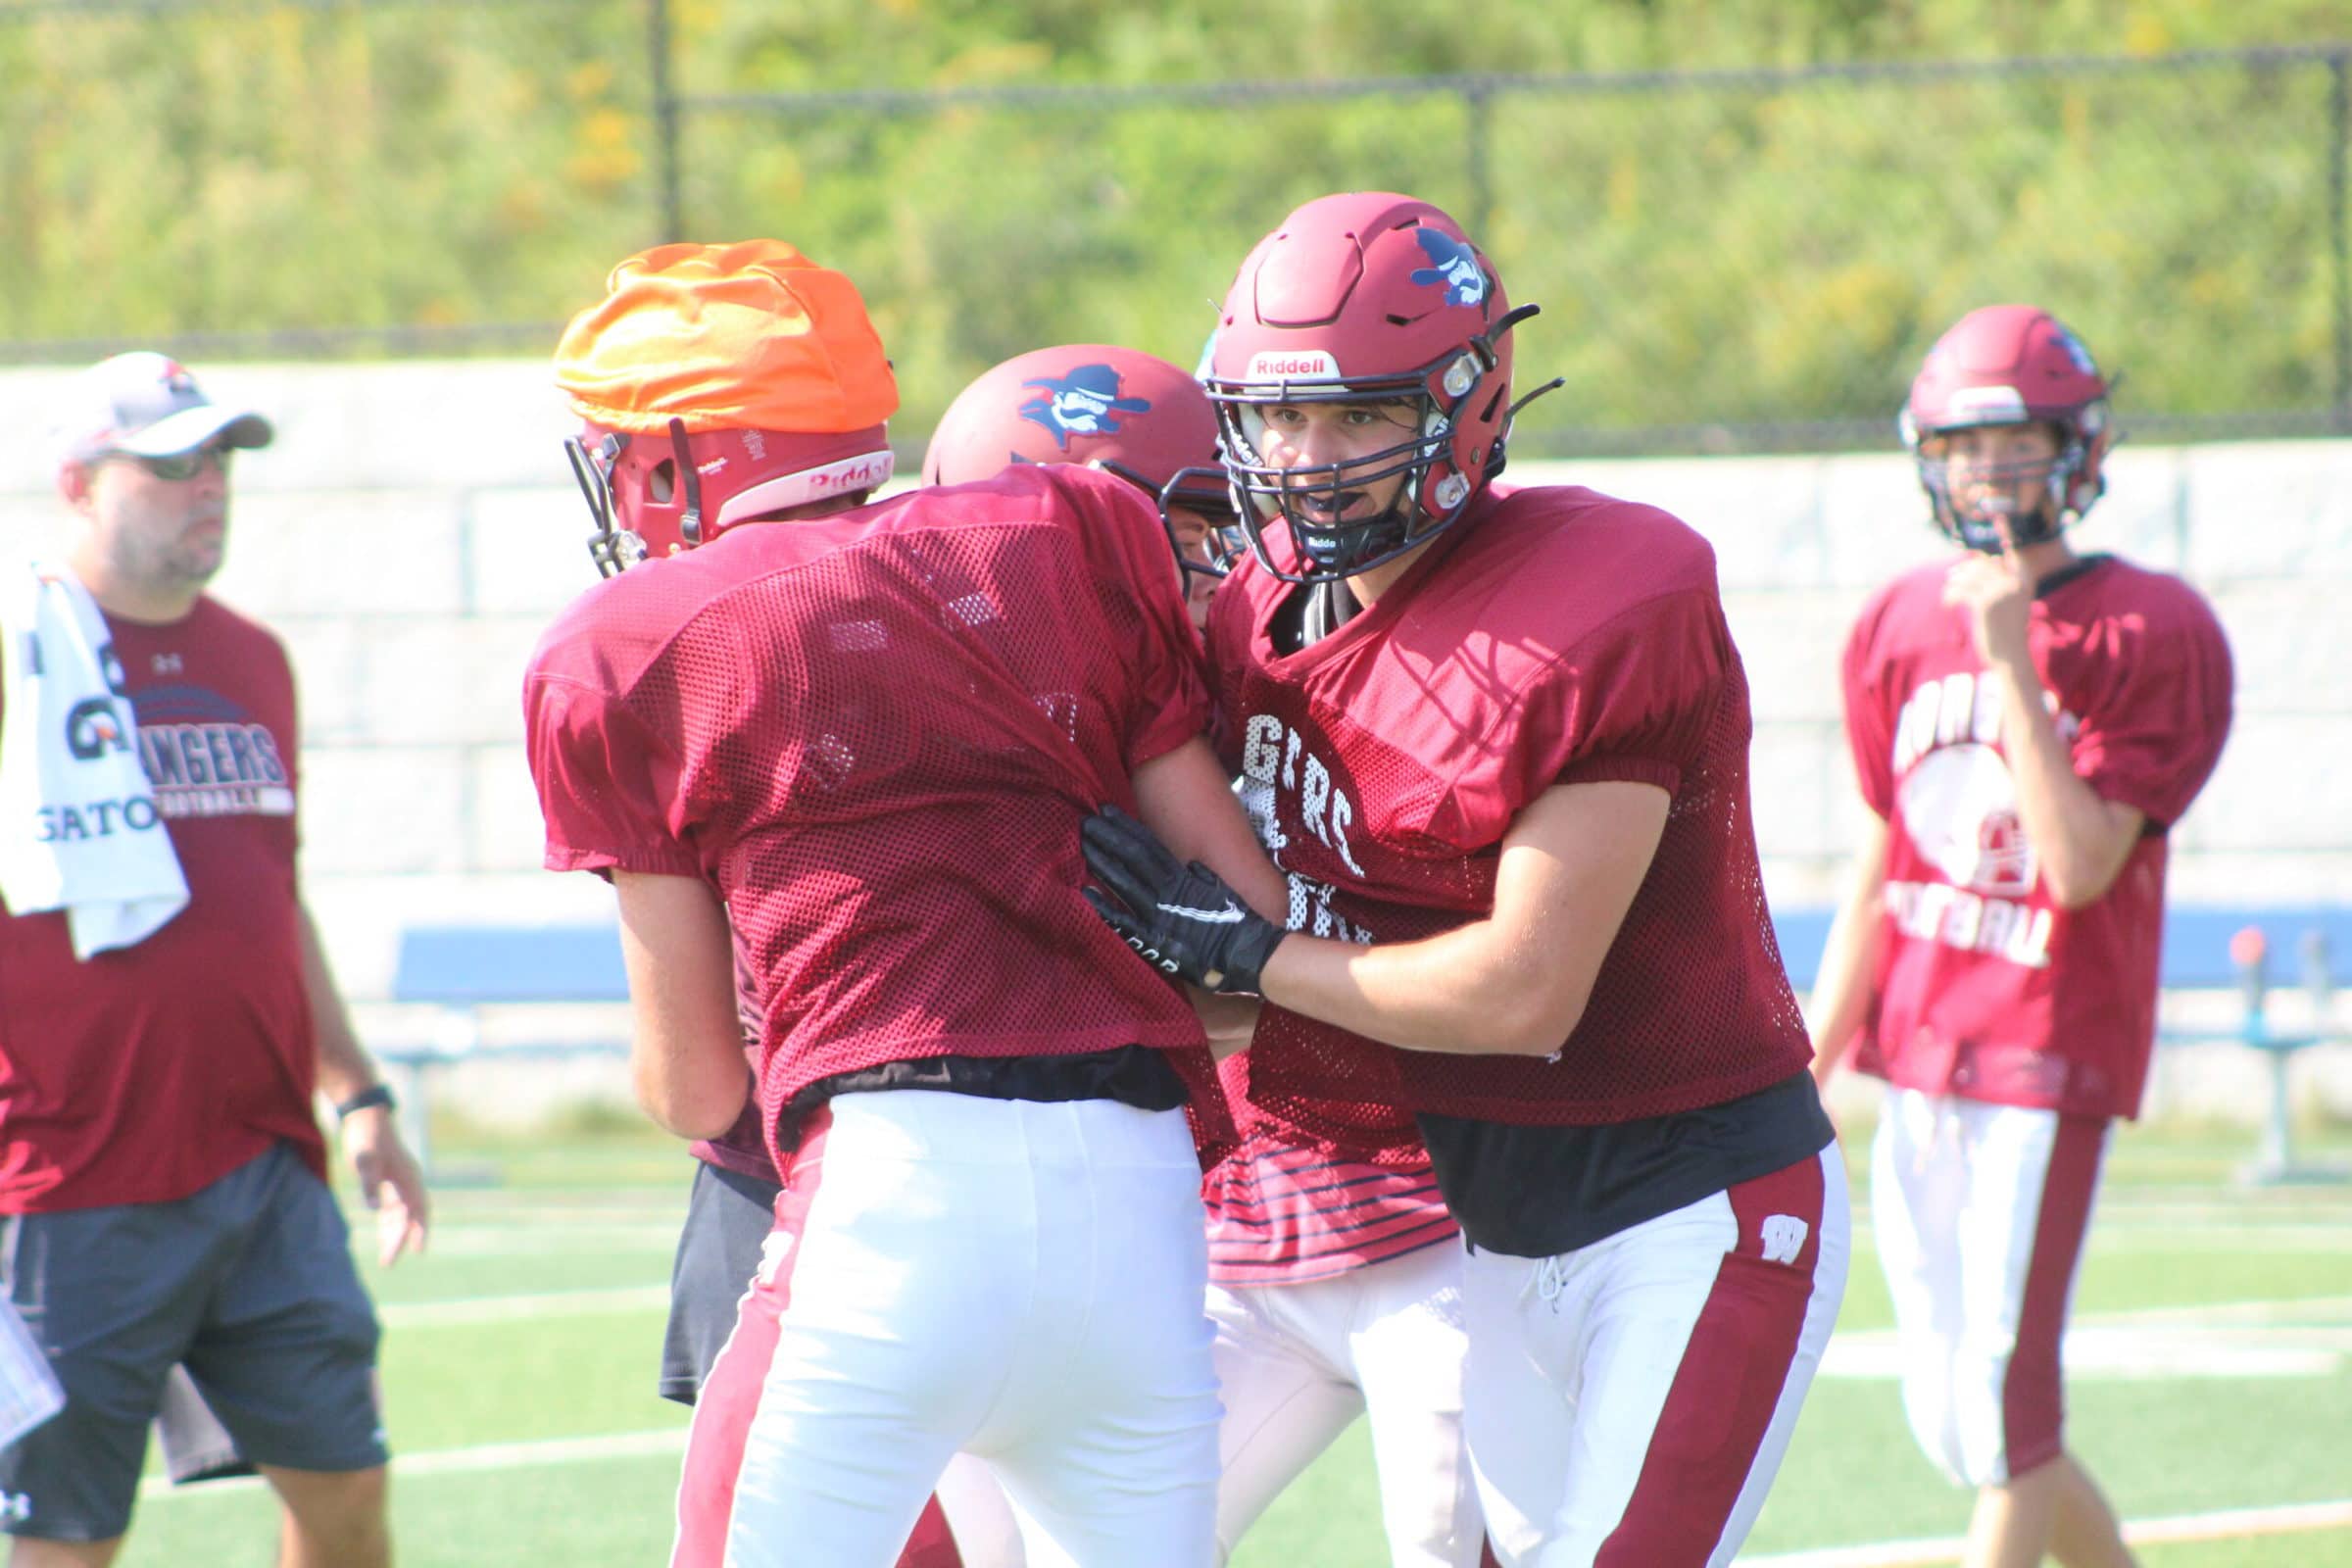 Westborough players practice. (Photo/Laura Hayes)